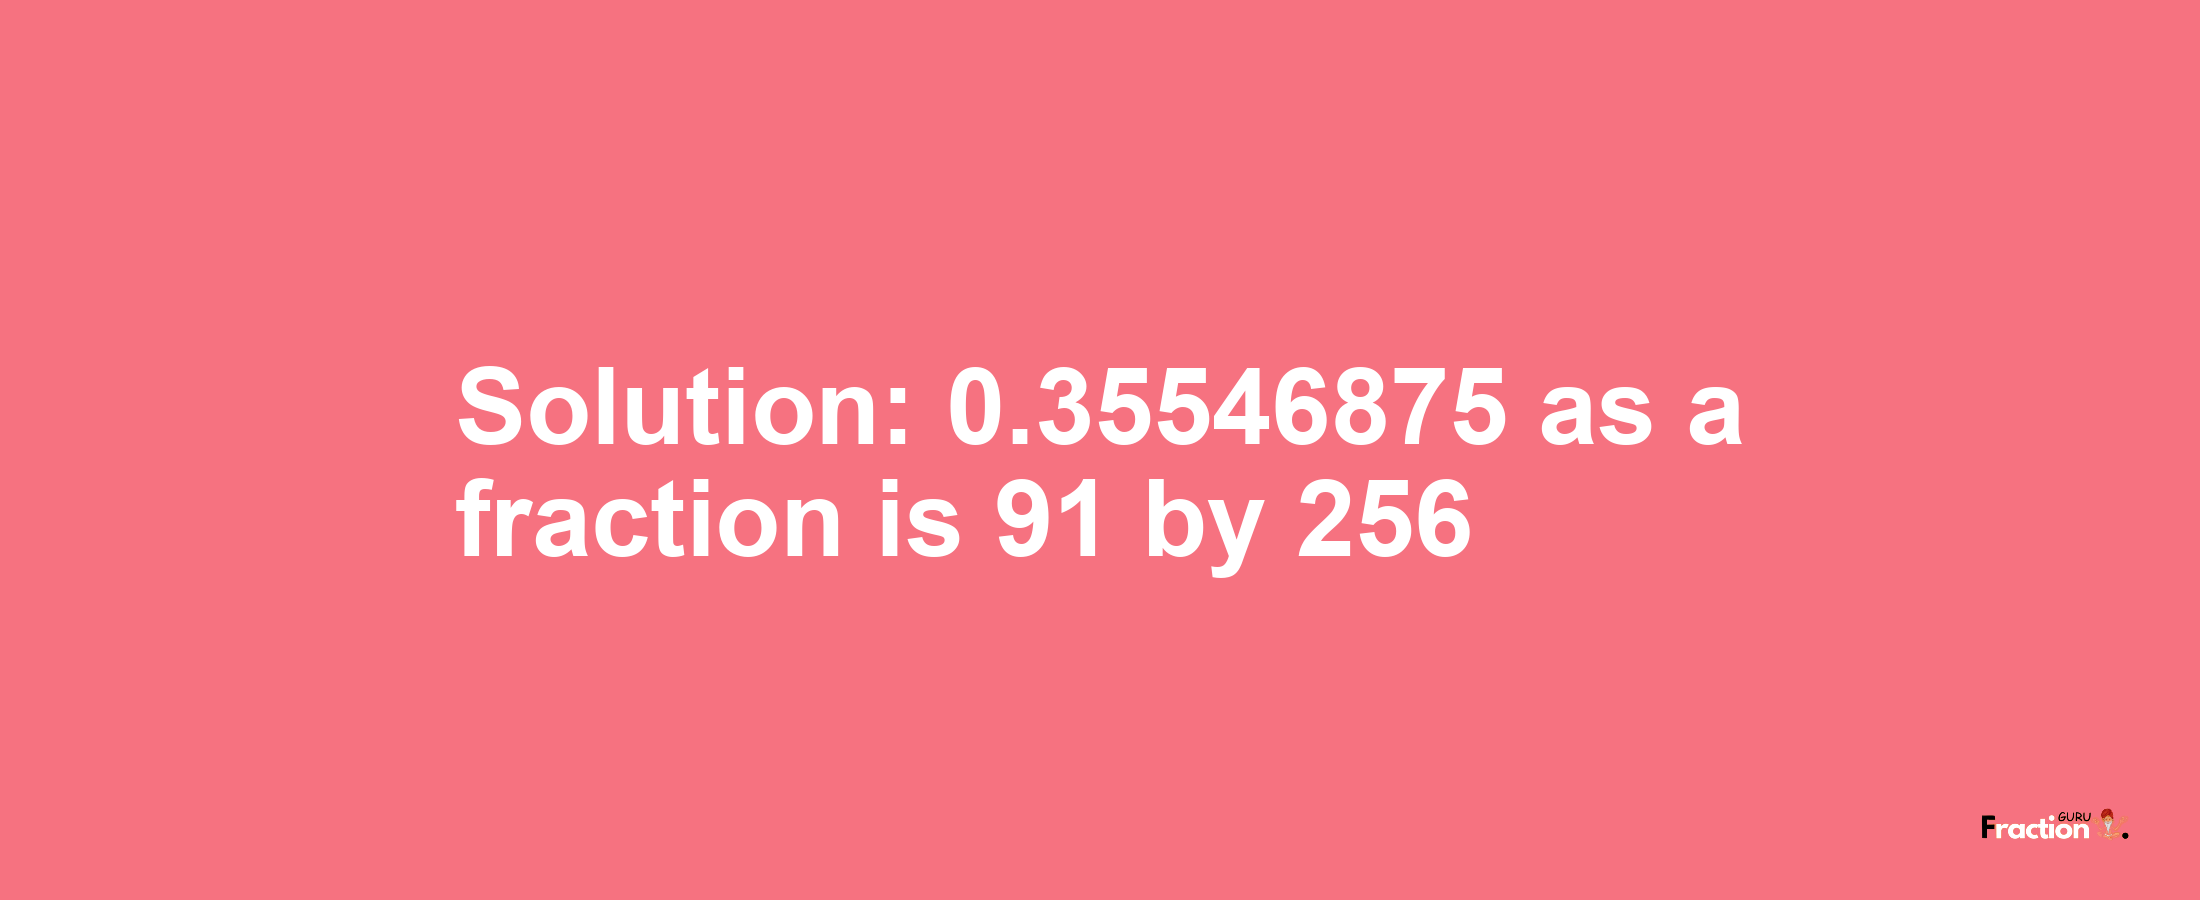 Solution:0.35546875 as a fraction is 91/256